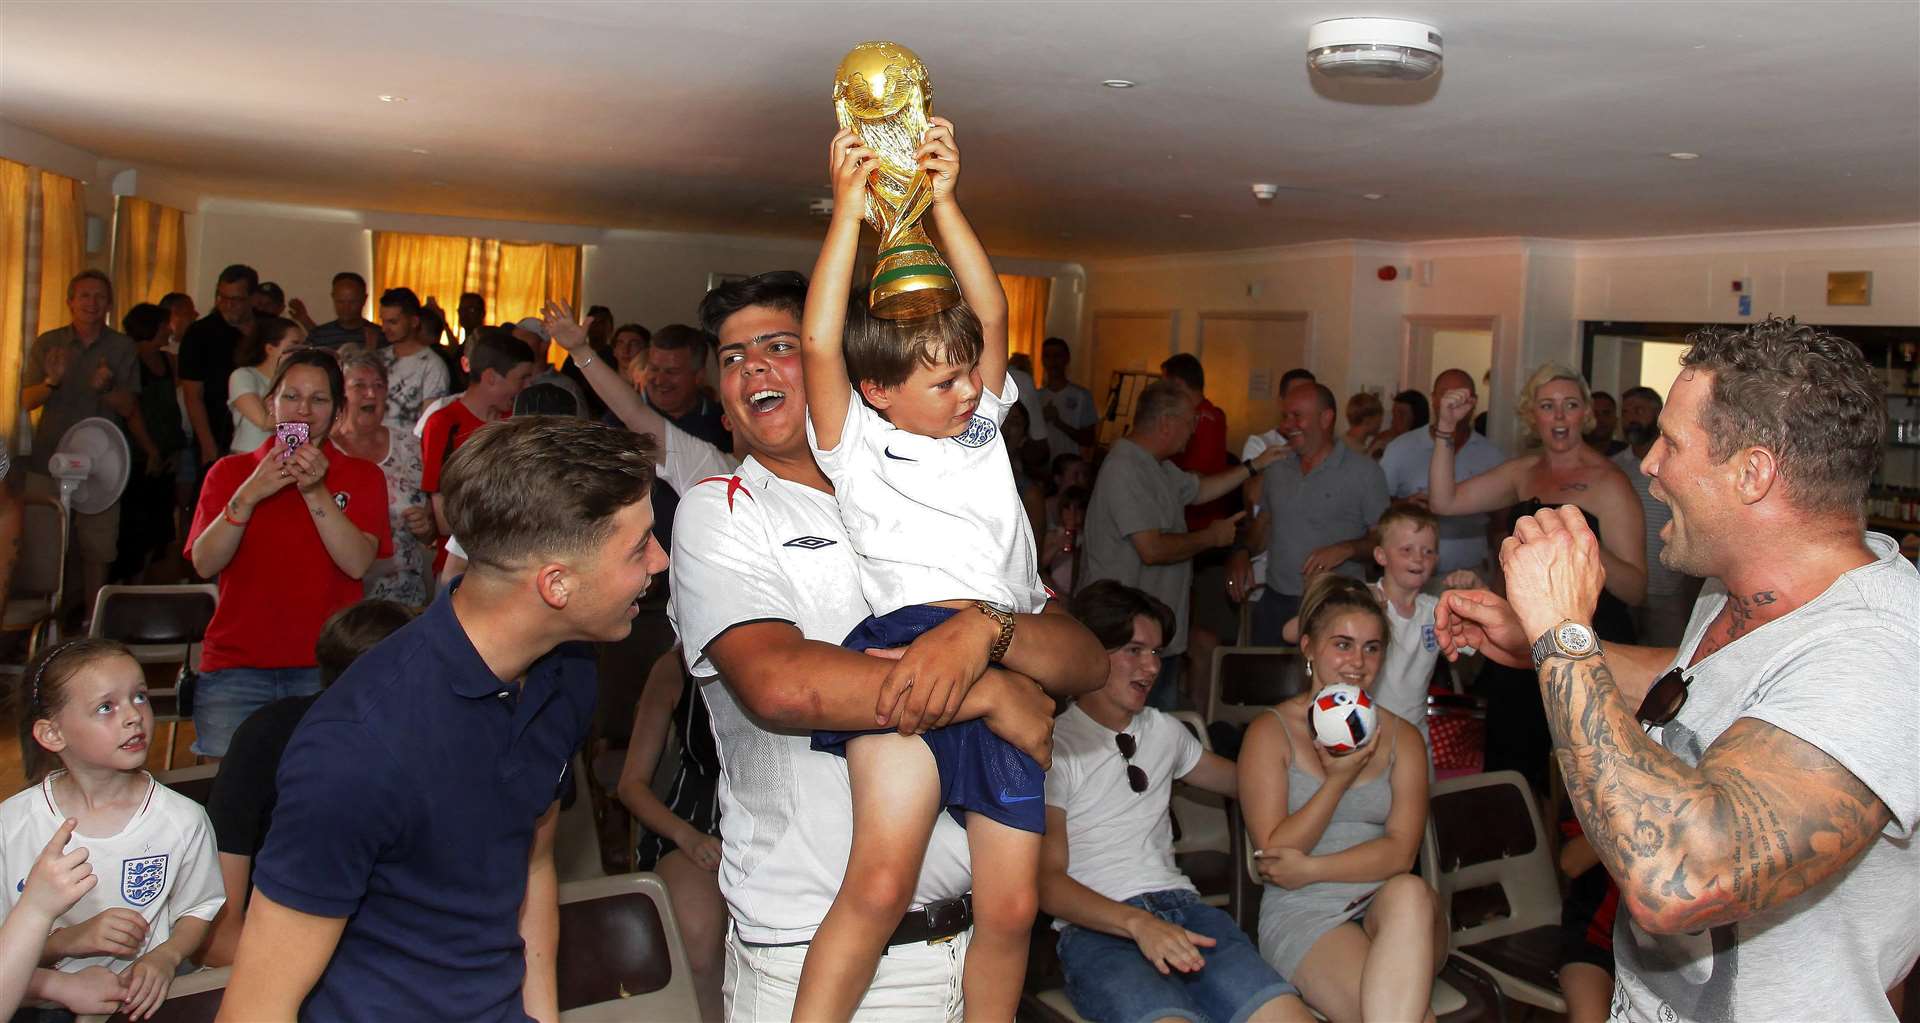 World Cup celebrations at the Ditten Community Centre. Logan Cribben 4 with the World Cup. Picture: Sean Aidan